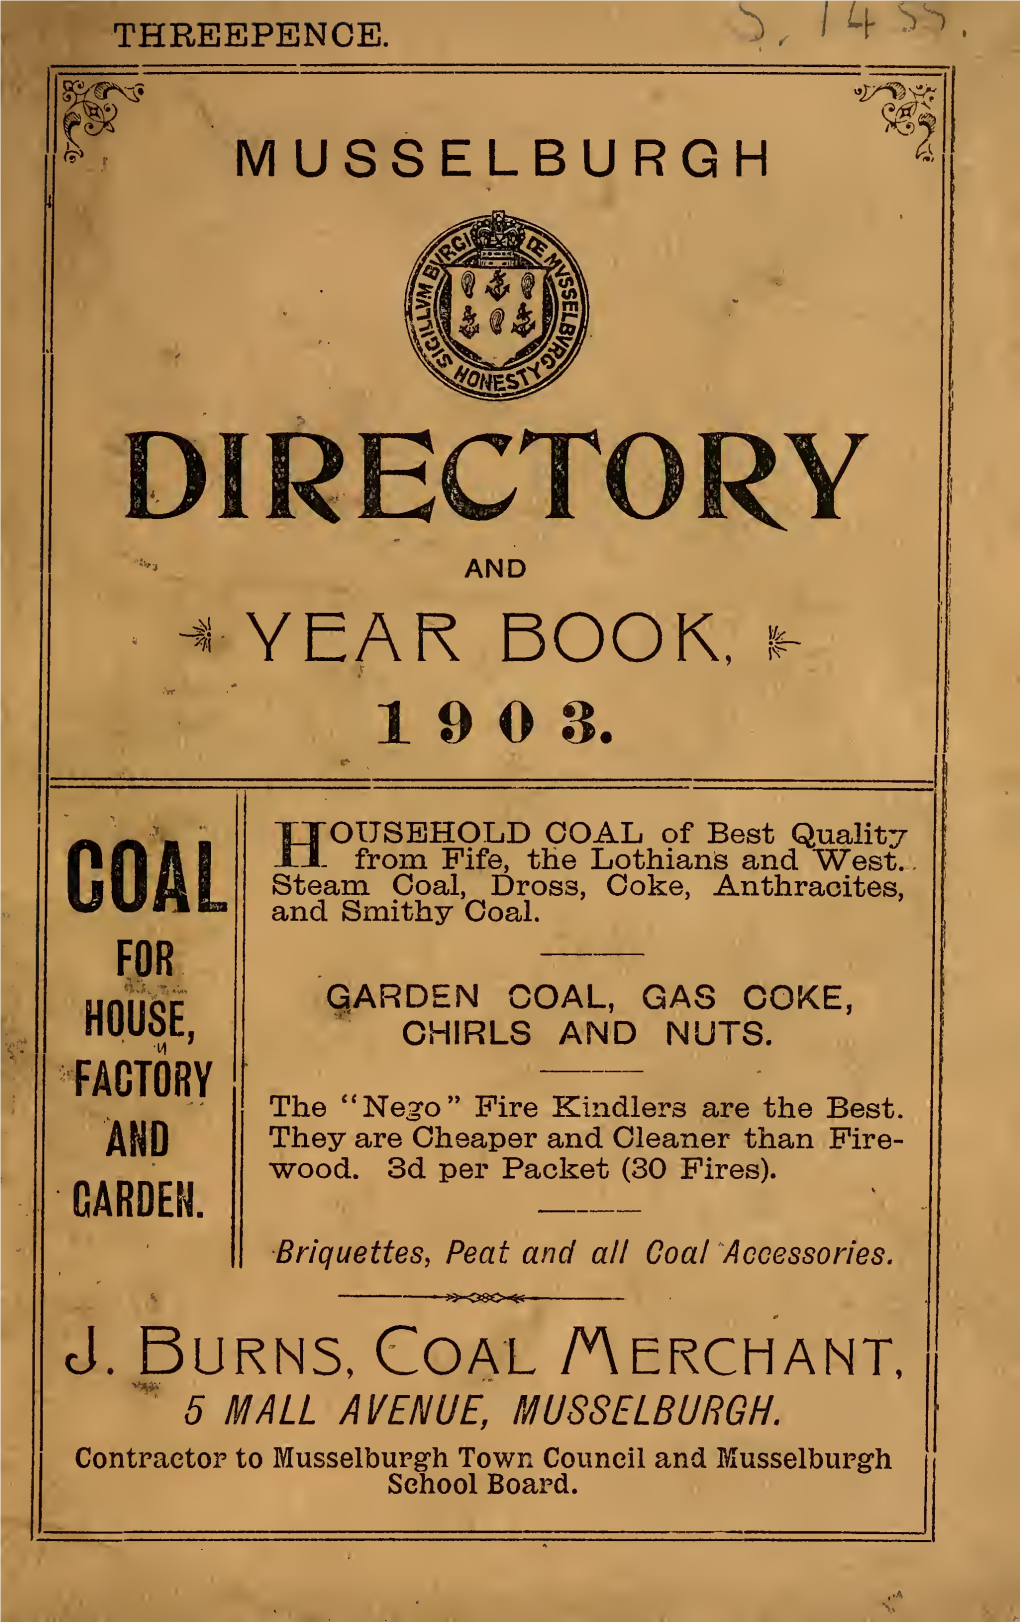 Musselburgh Directory and Year Book